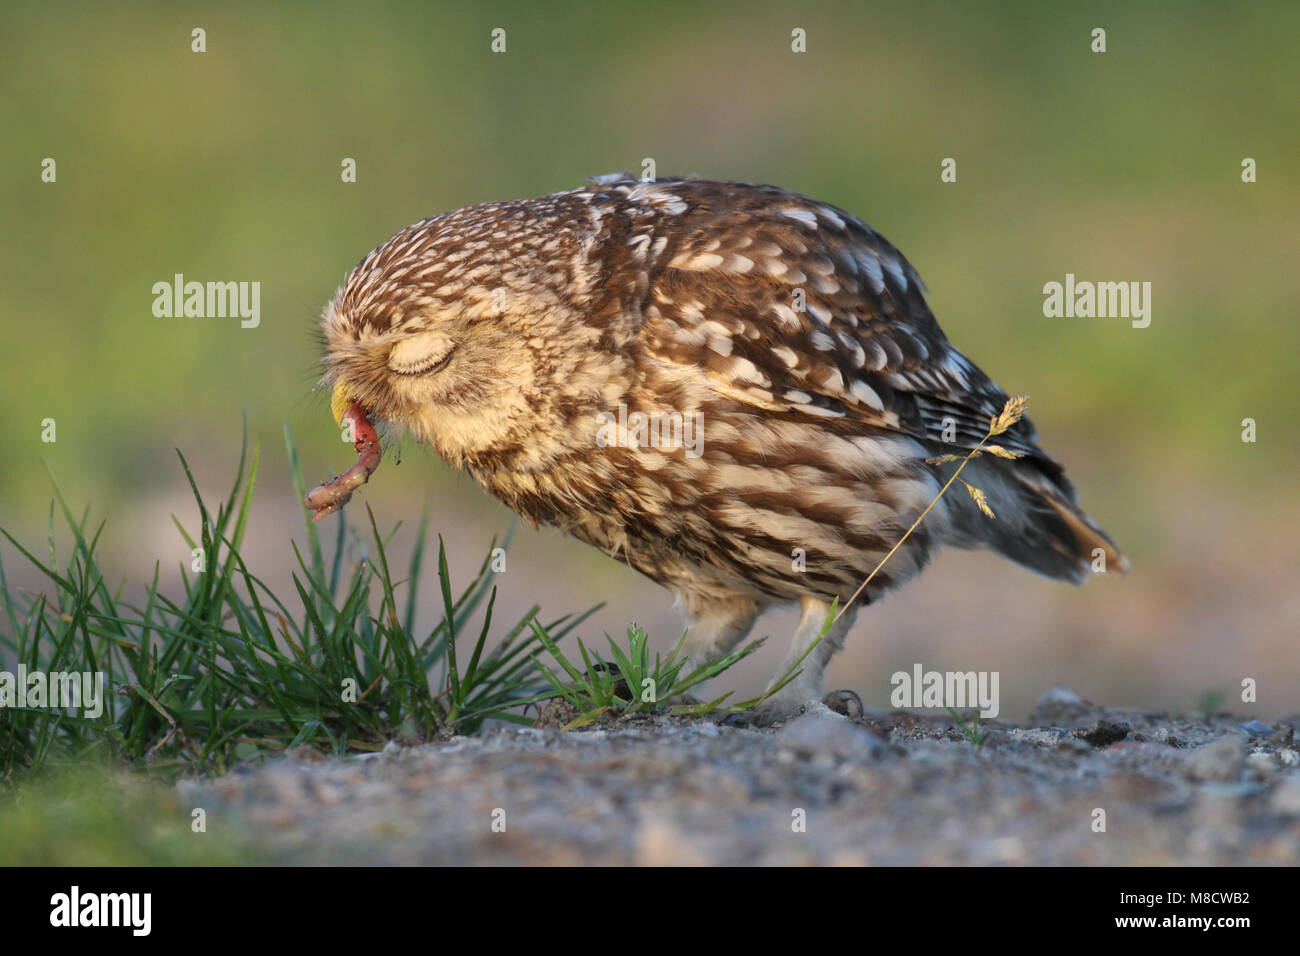 Steenuil een worm etend; Little Owl eating a worm Stock Photo